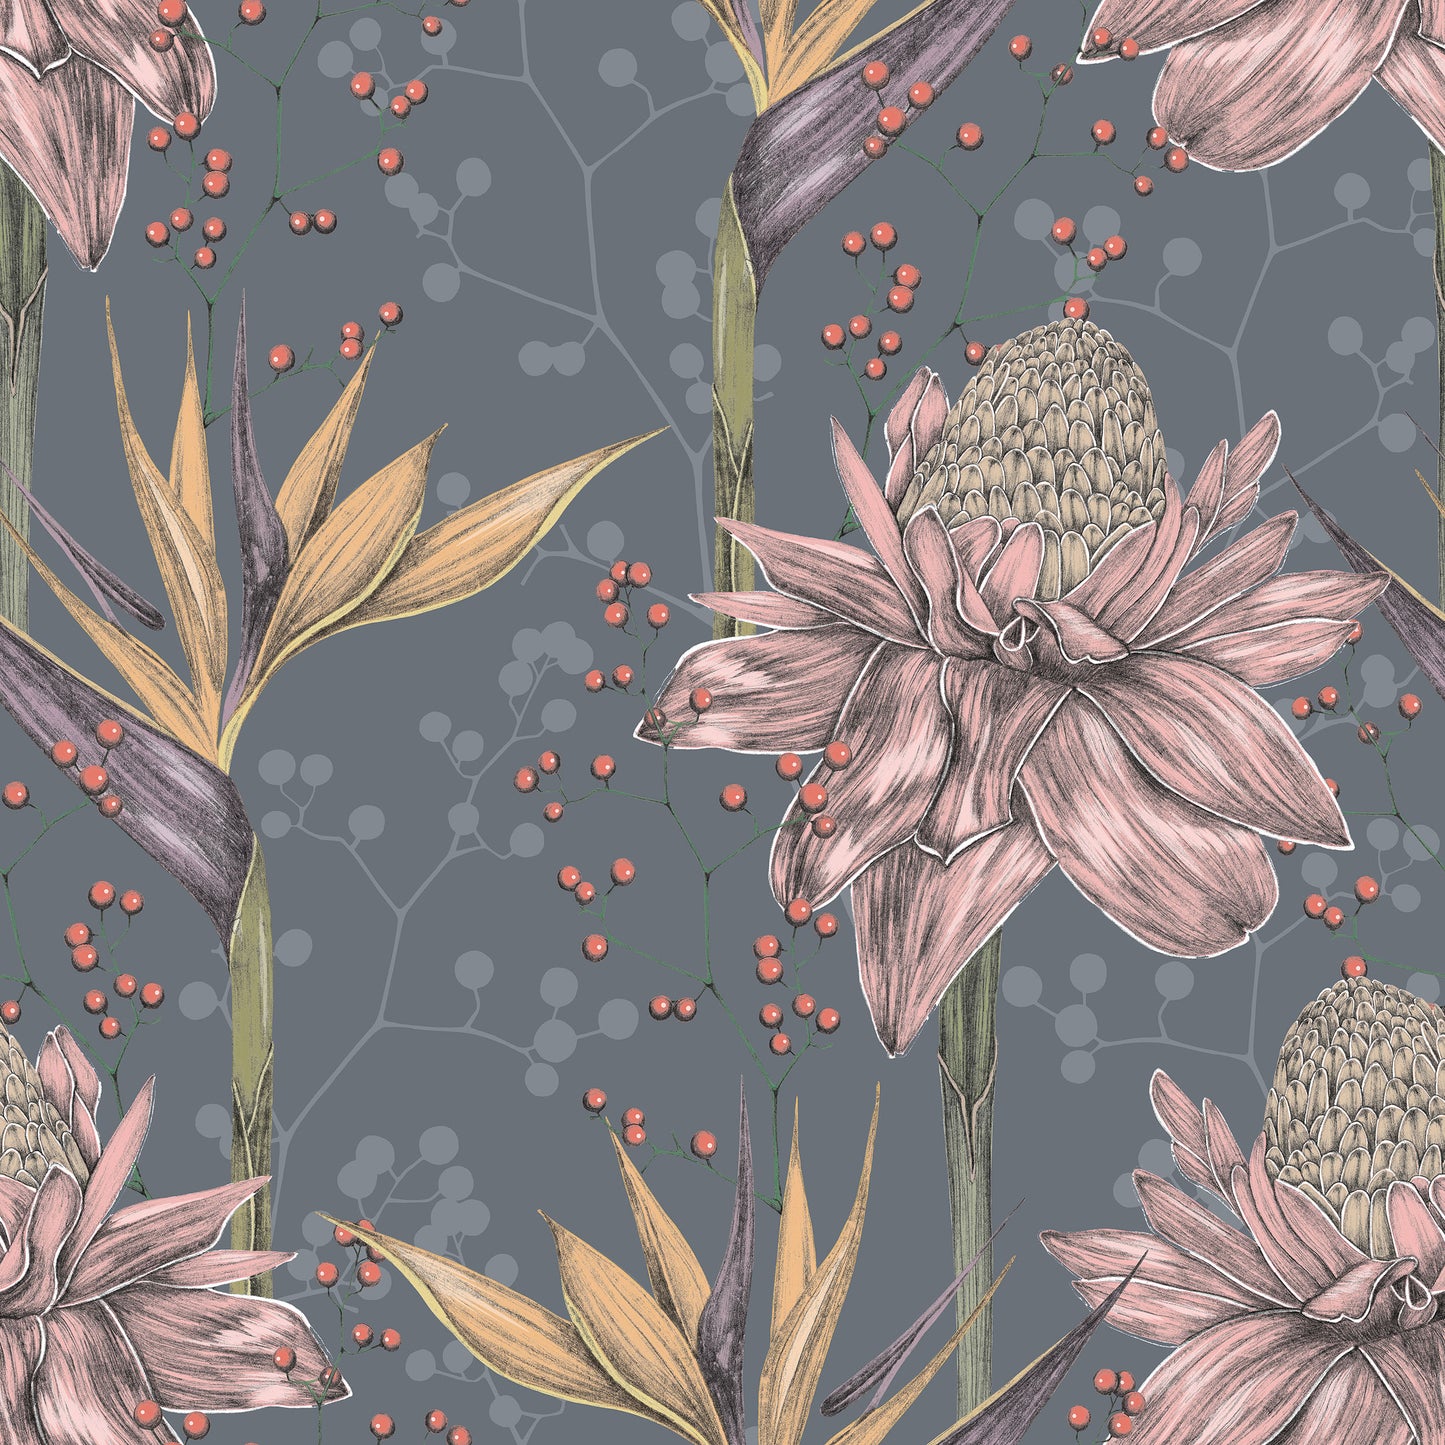 Foral paradise rose/pink and green floral print with yellow, brown and green birds of paradise flowers on grey/gray background easy to install and remove peel and stick custom wallpaper available in different lengths/sizes locally created and printed in Canada. Removable, washable, durable, commercial grade, customizable and water proof.